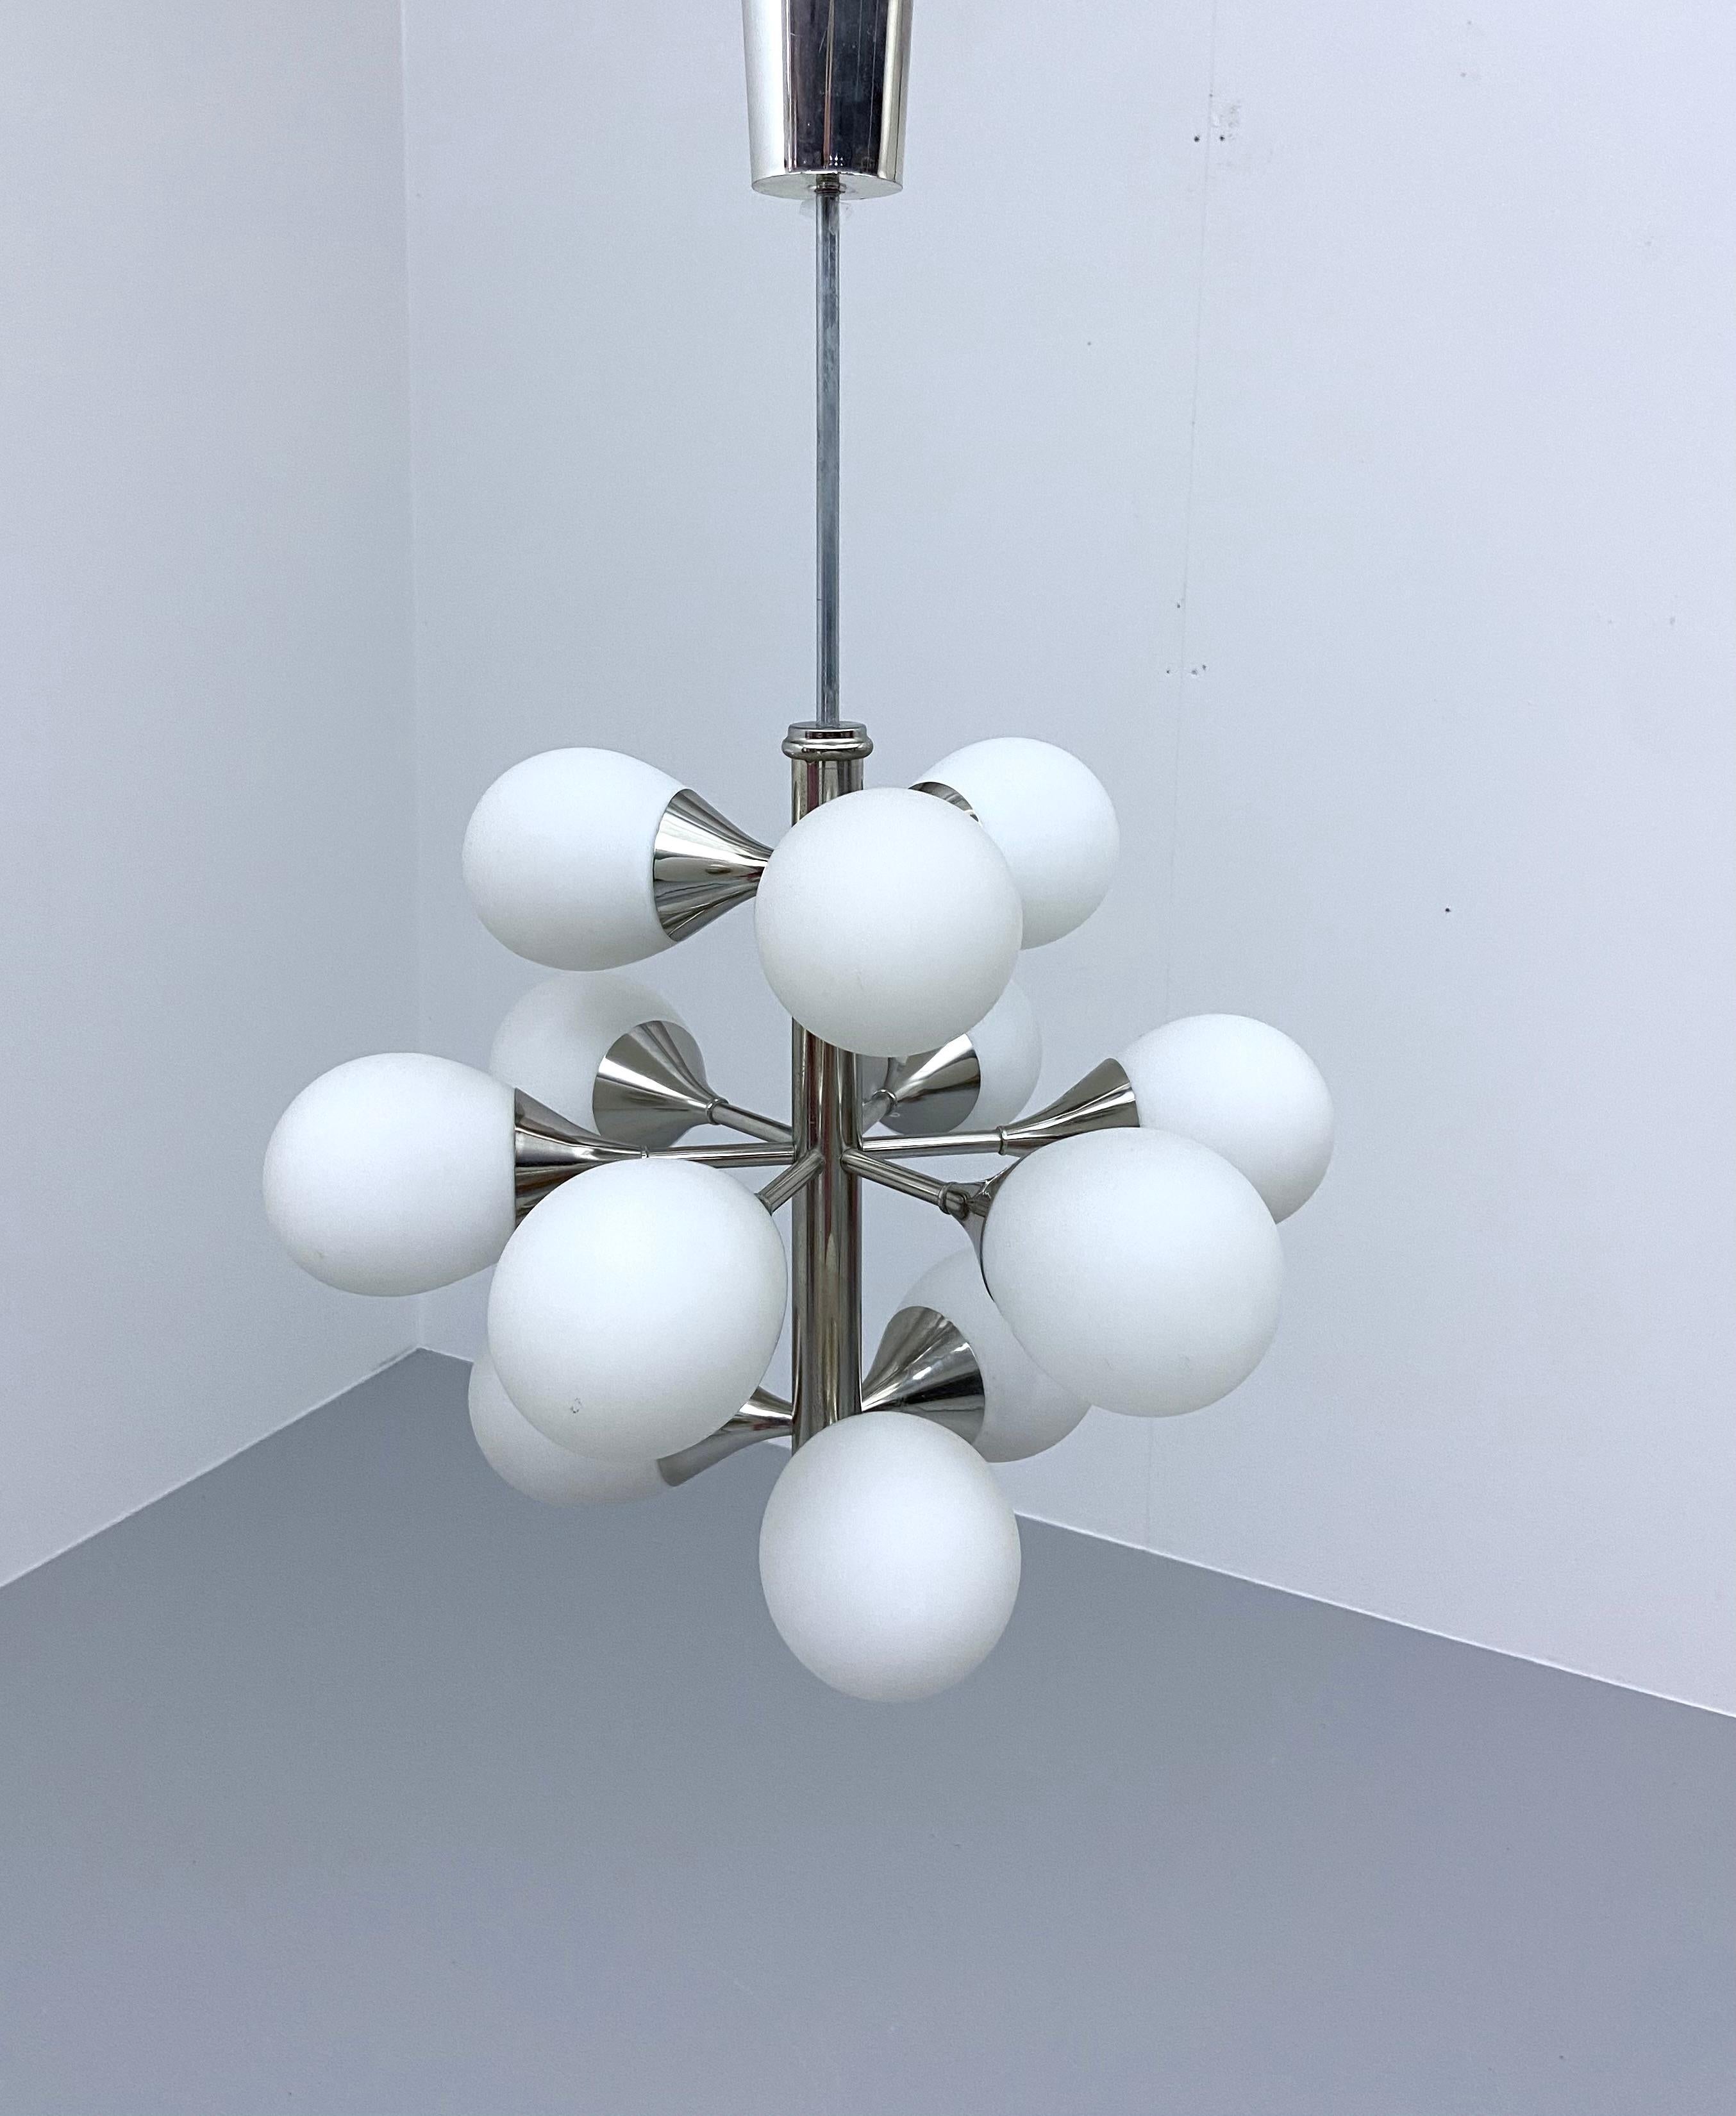 Compact atomic sputnik with 12 teardrop shaped opaline bulbs.

Nice crisp and clean appearance when switched off but warm and vibrant when switched on. Spreading a lot of light and love.

The teardrops are what makes this famous Kaiser Leuchten